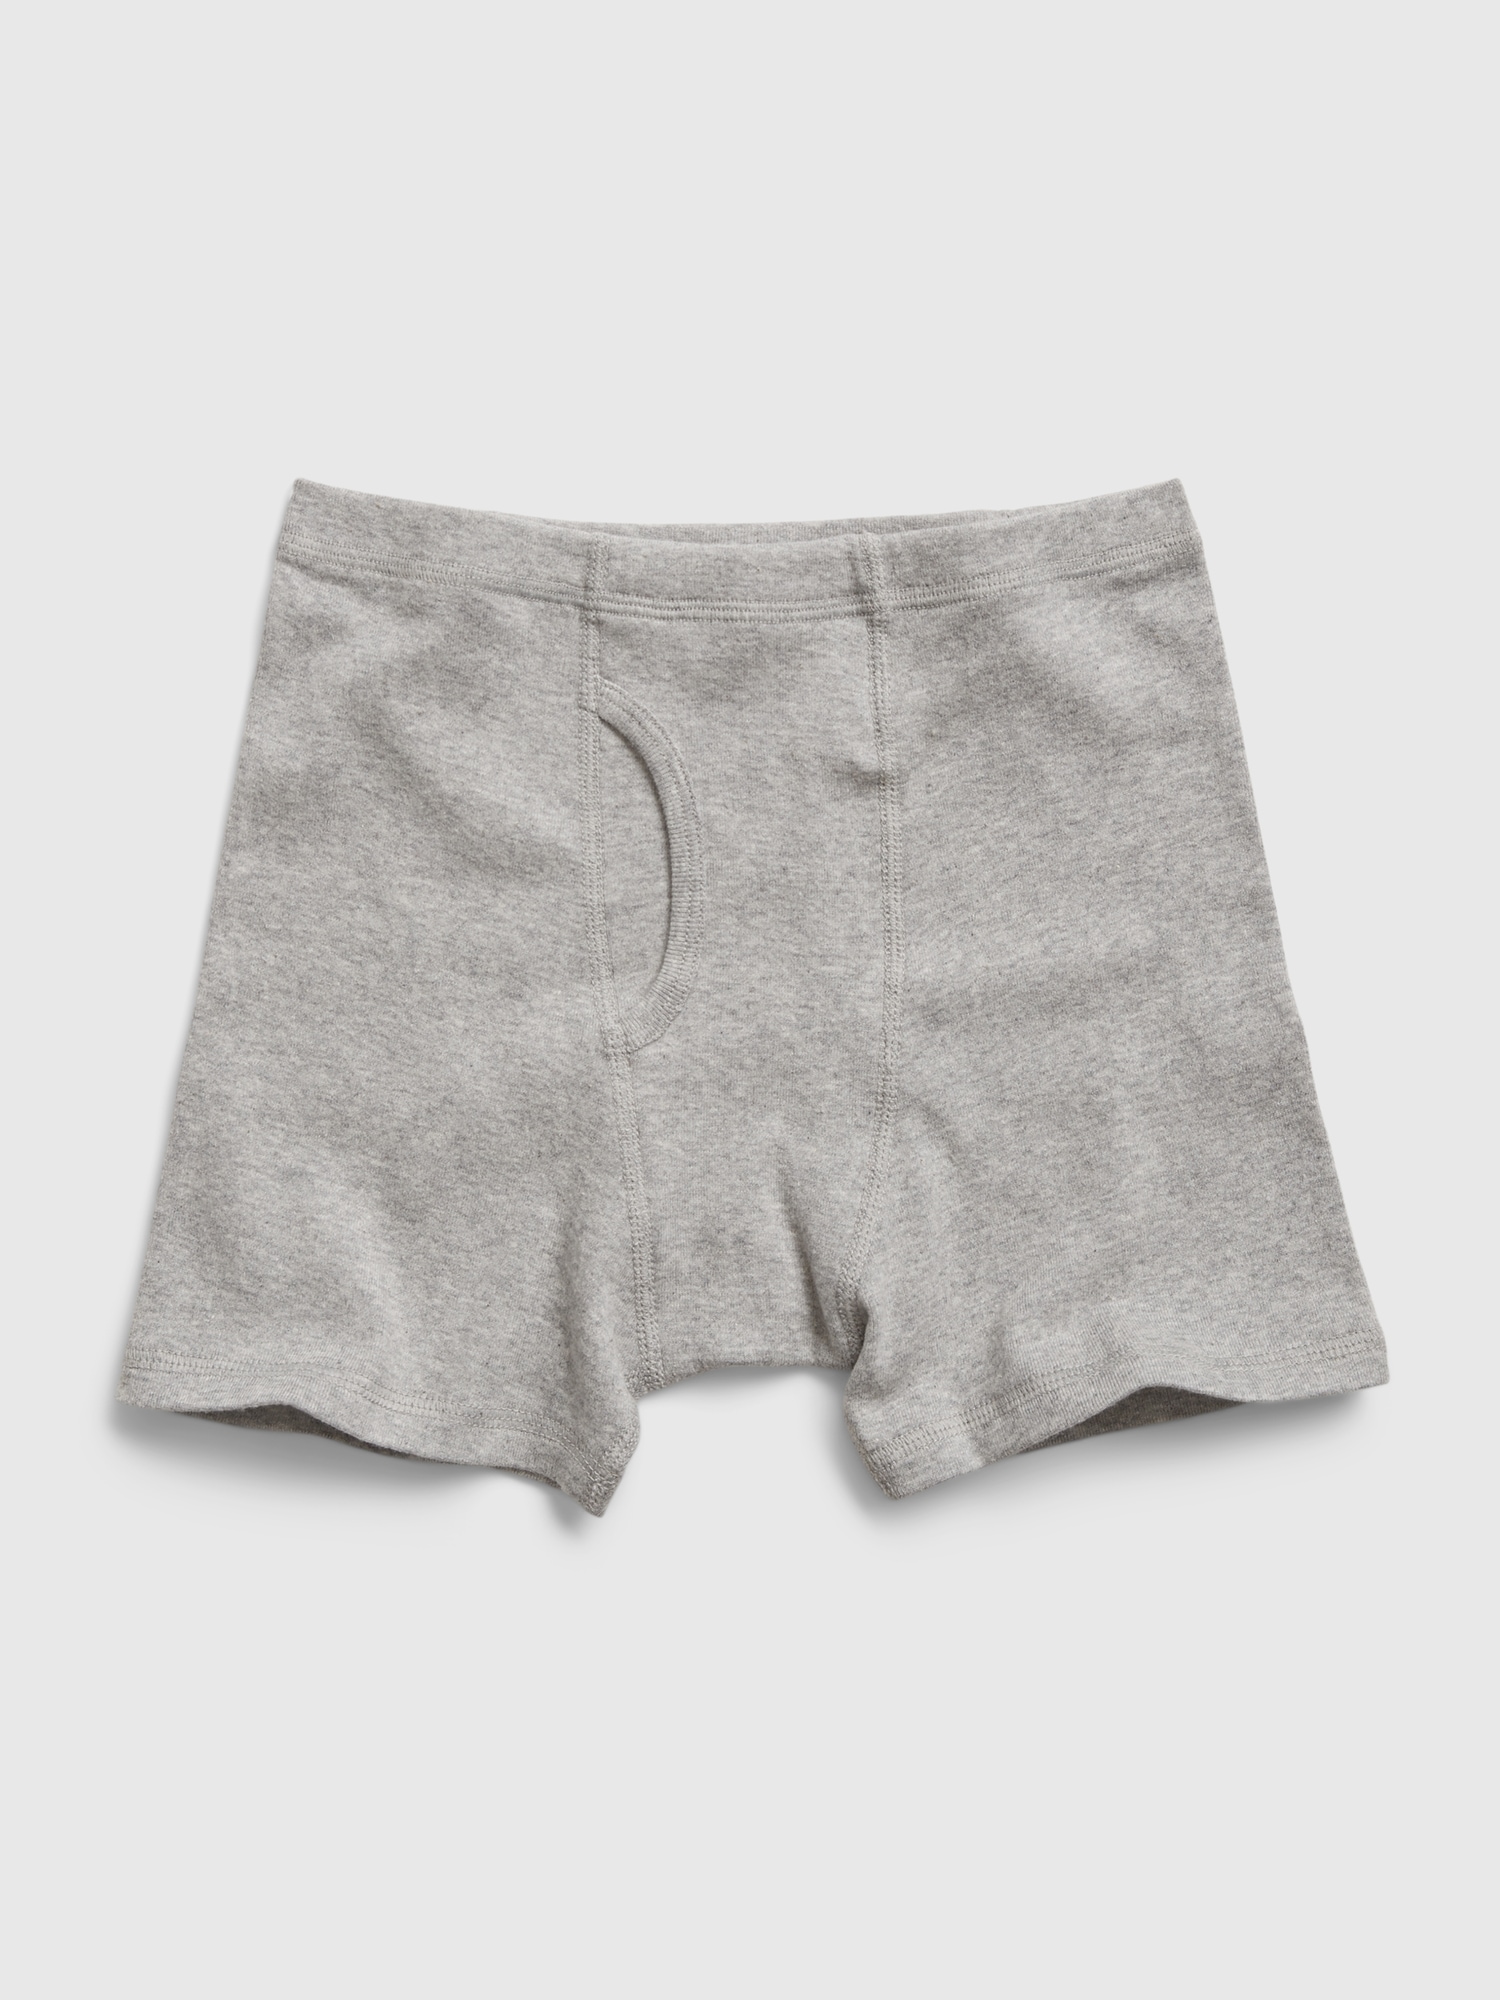 Grey knickers made of organic cotton - Bread & Boxers